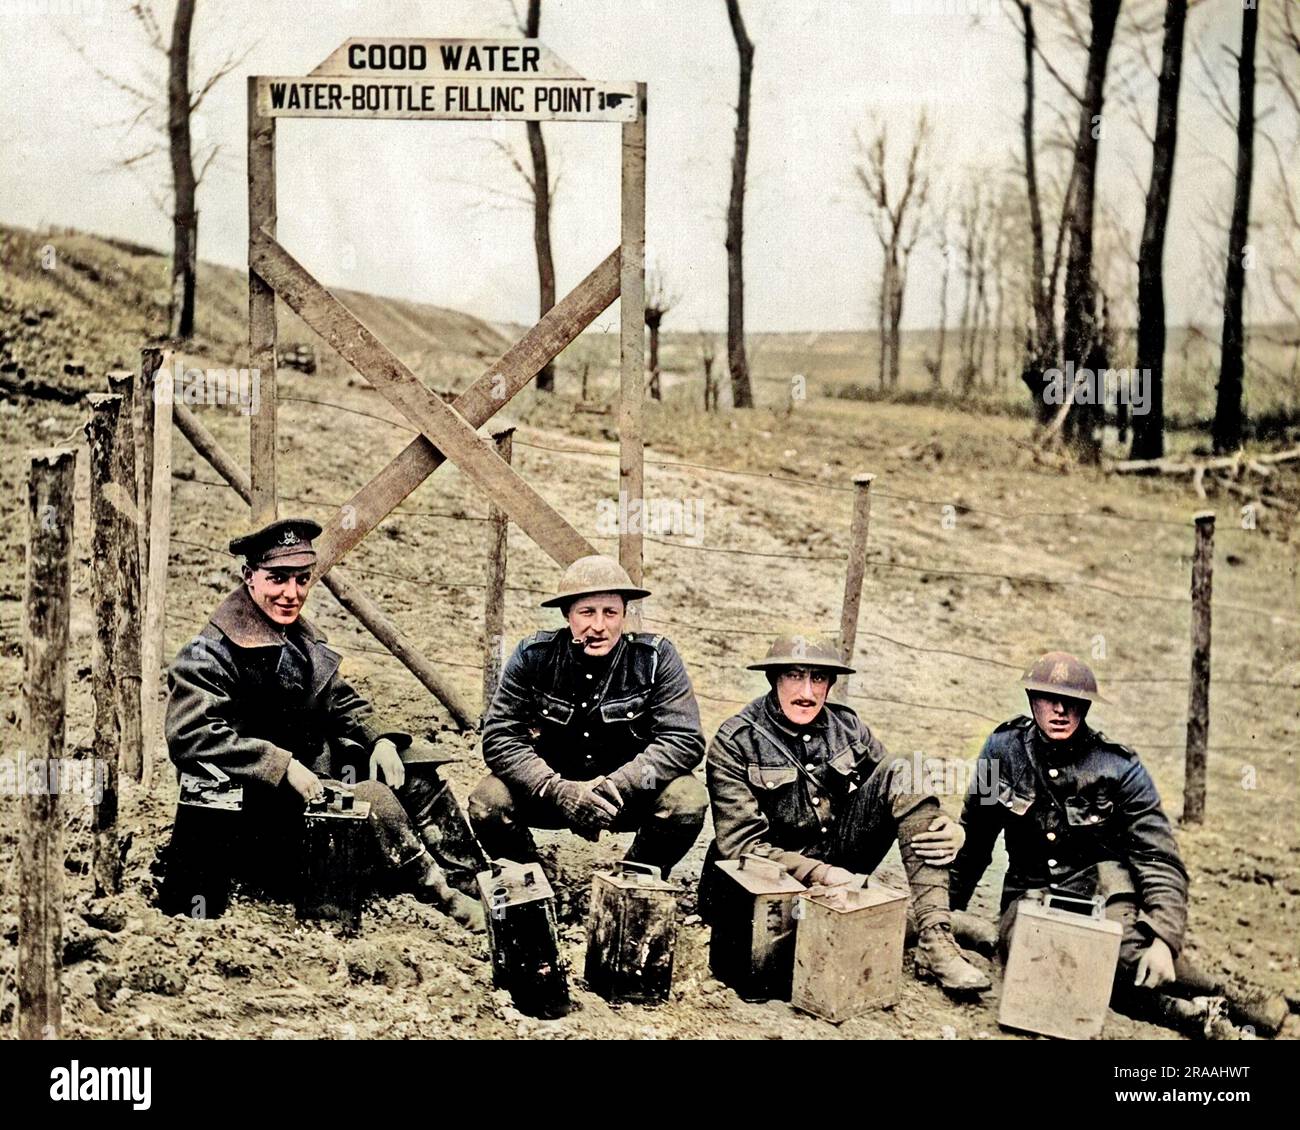 Four British soldiers with cans of water near a supply point on the Western Front during World War One.     Date: circa 1916 Stock Photo